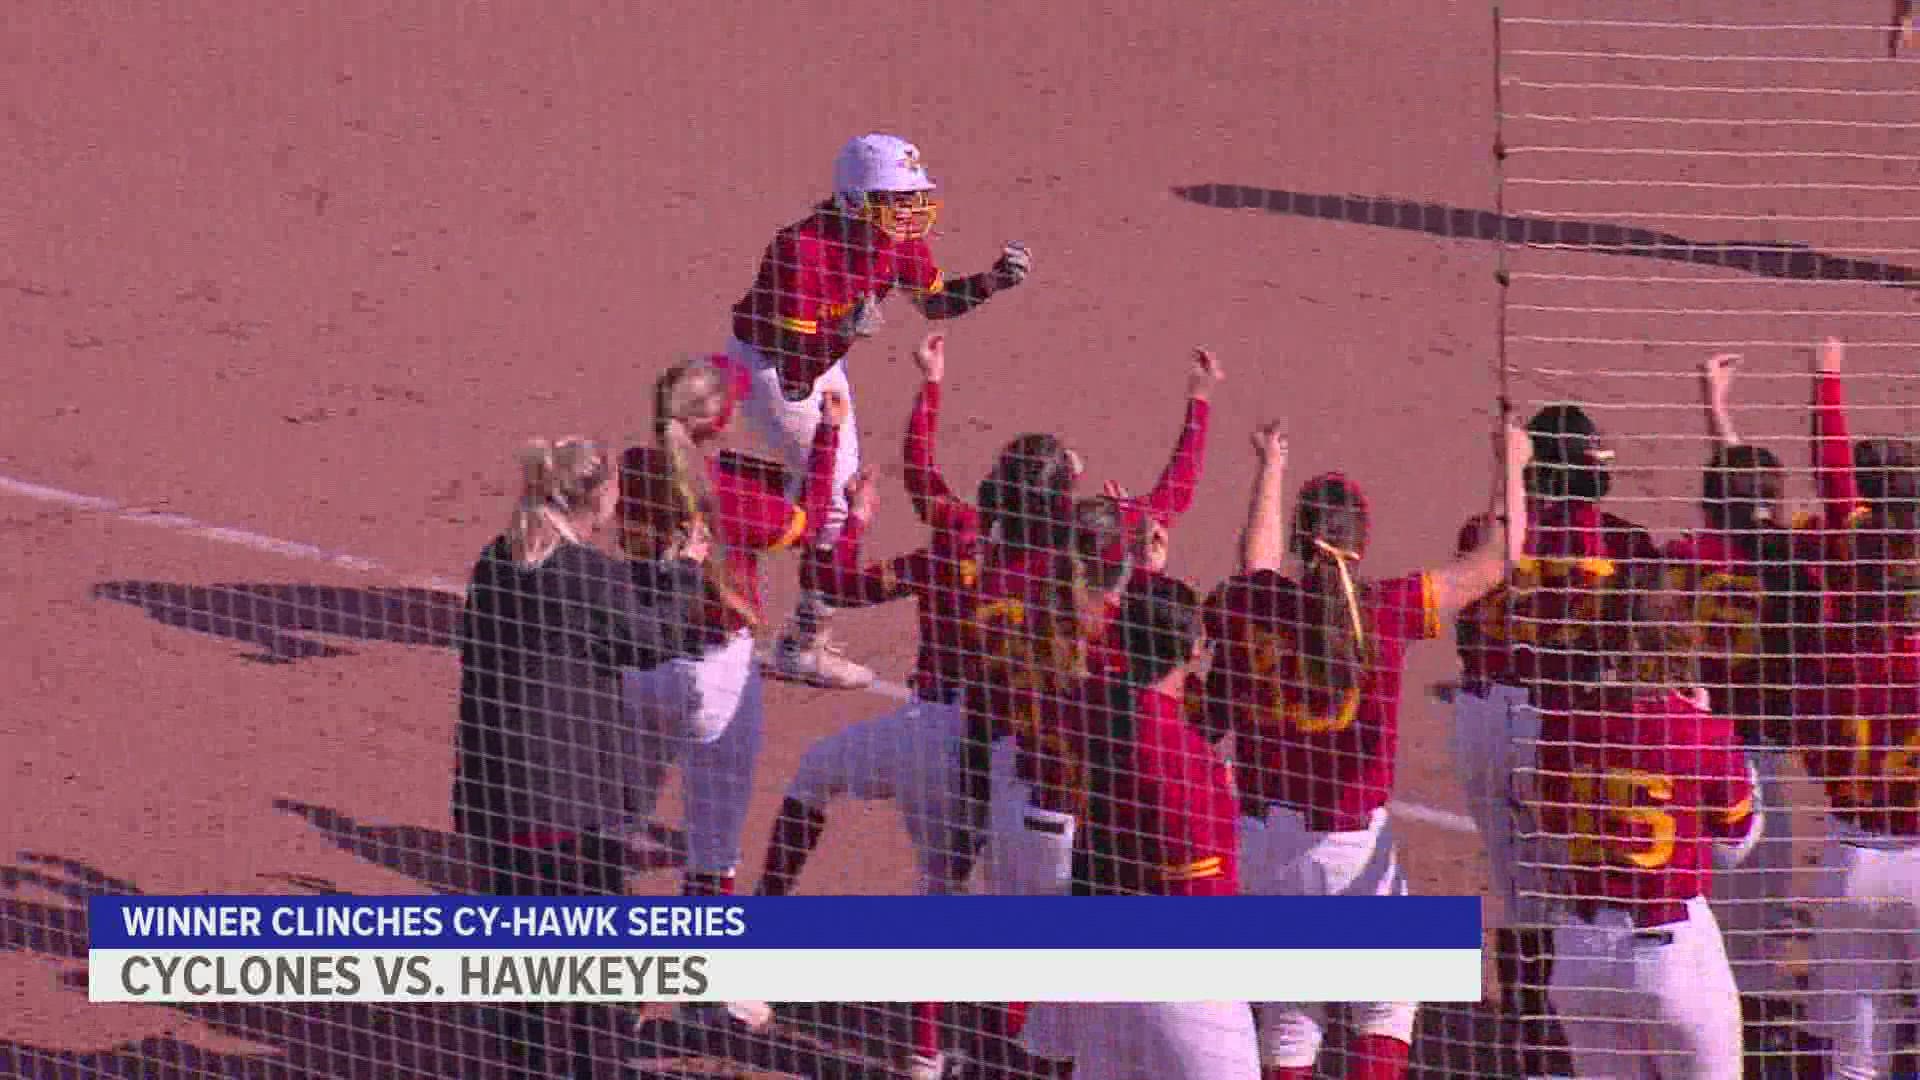 It all came down to the softball game between the Cyclones and Hawkeyes. Winner clinches their Cy-Hawk Series for their school.